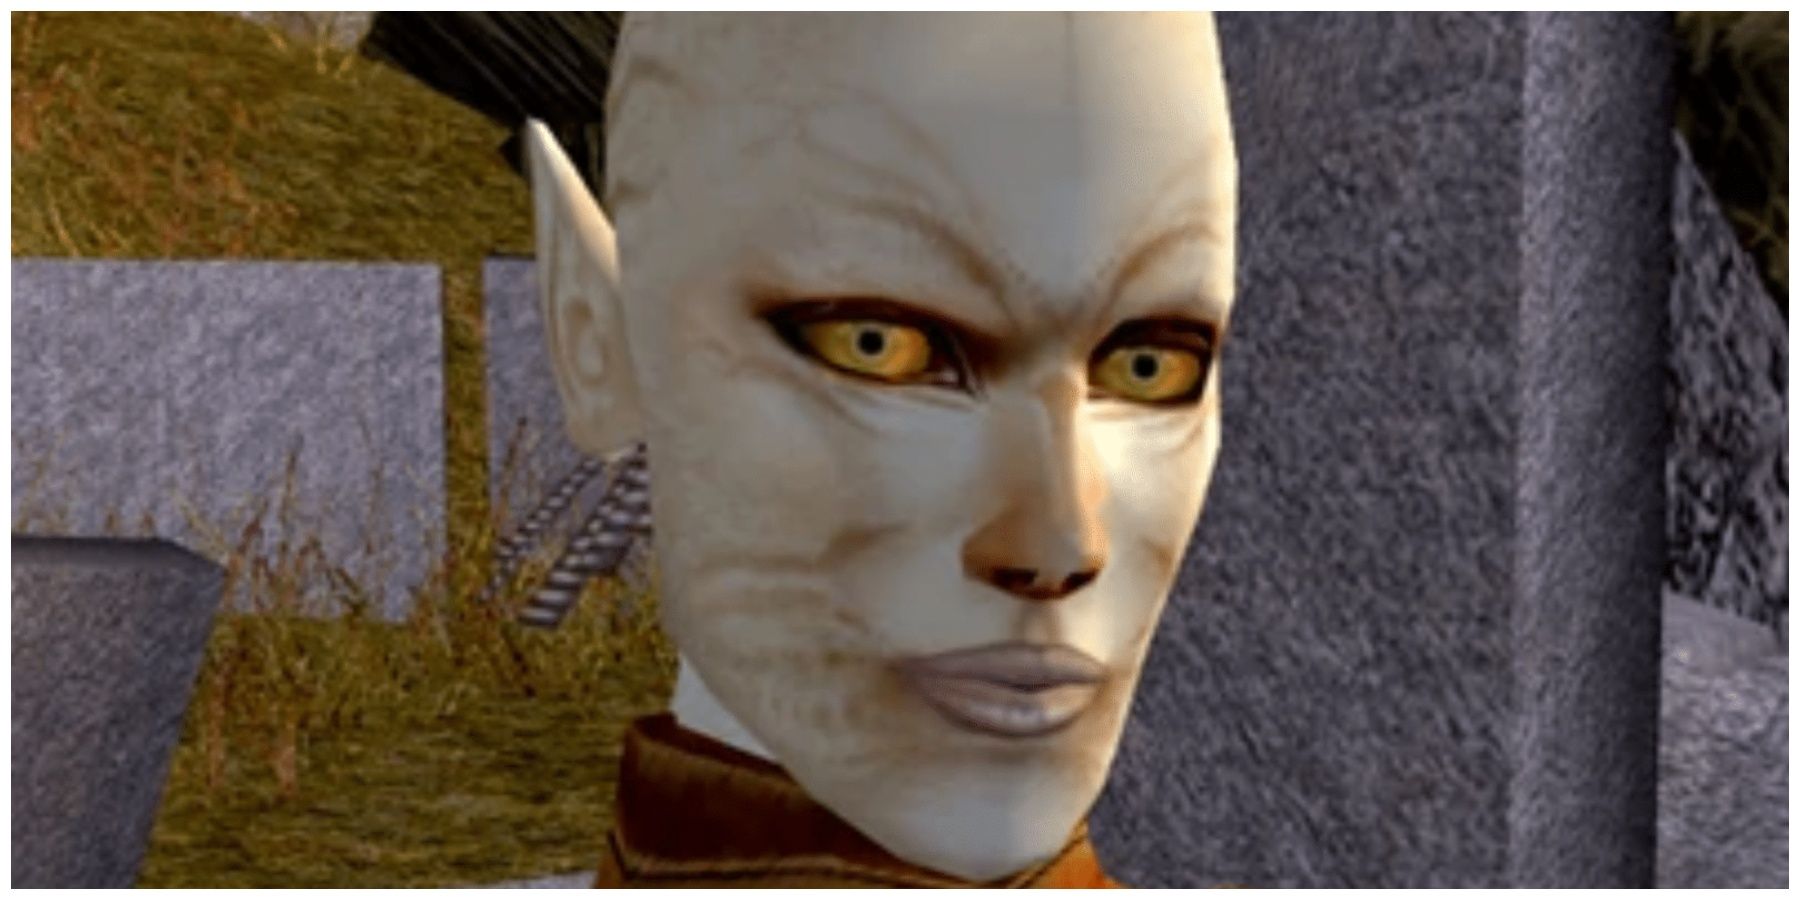 Juhani in Star Wars Knights of the Old Republic